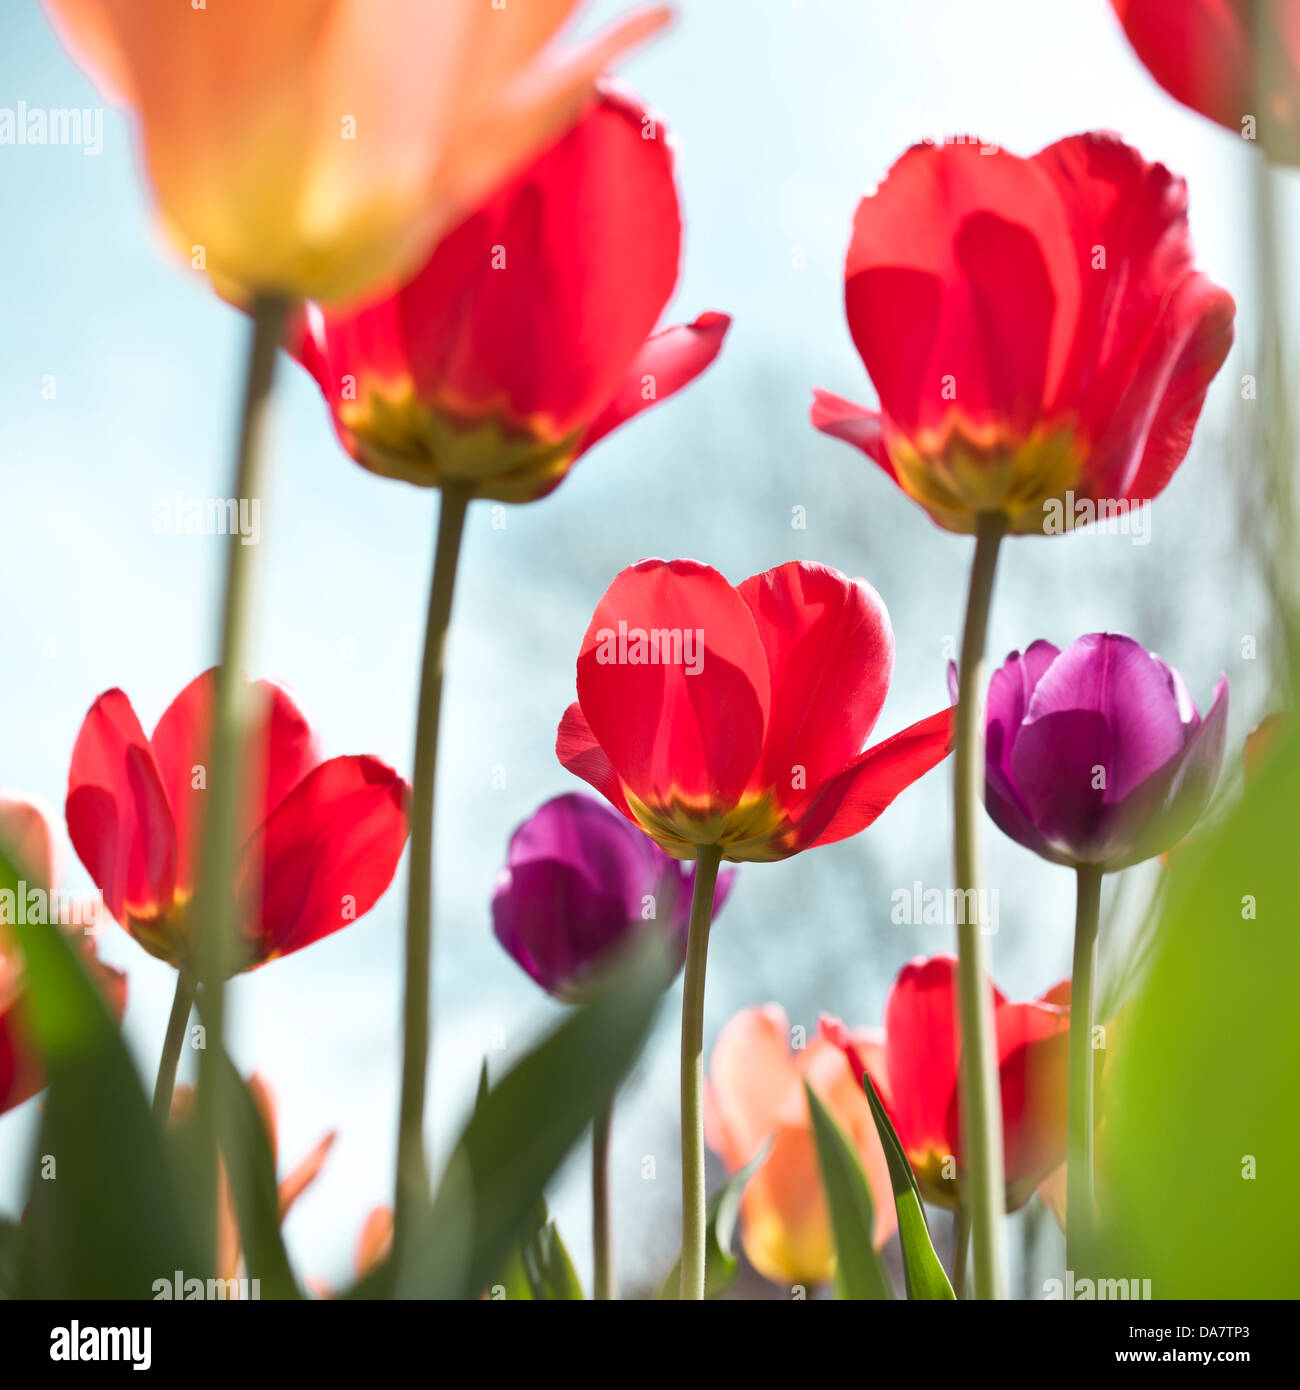 Colorful tulips blooming in the spring garden. This features flowers in orange, red and purple against a blue sky. Stock Photo